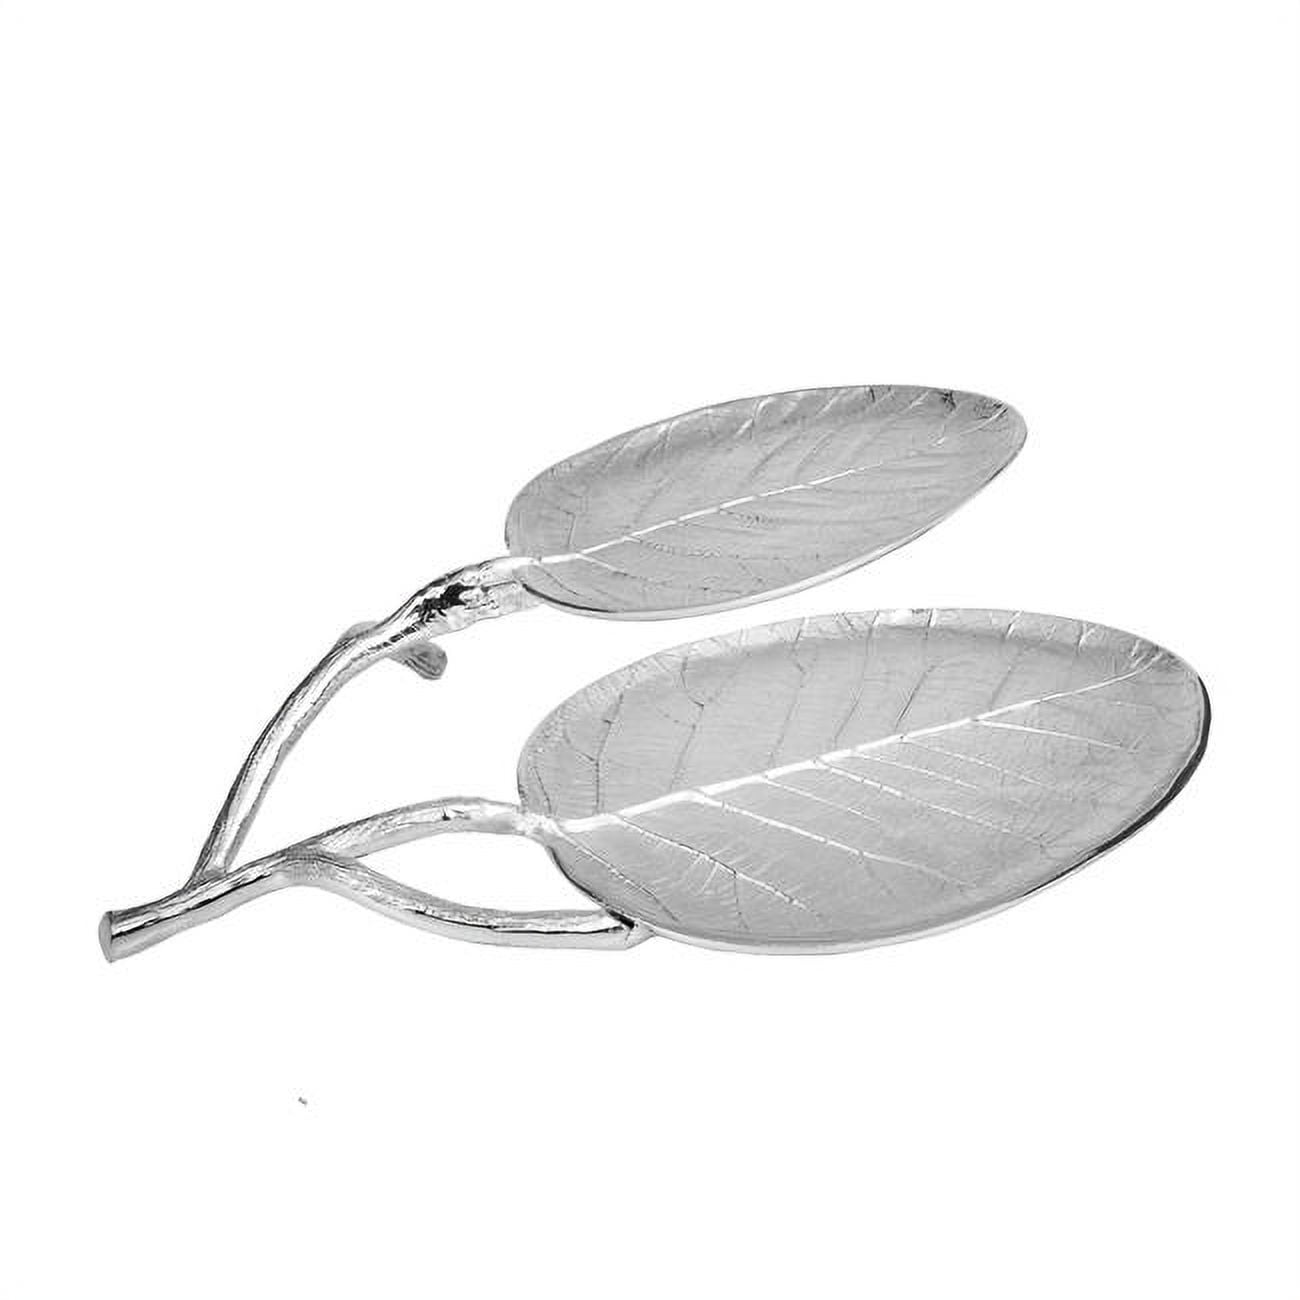 Picture of Classic Touch LE946 Nickel Leaf 2 Bowl Relish Dish, 14.5 x 11.25 x 2.75 in.